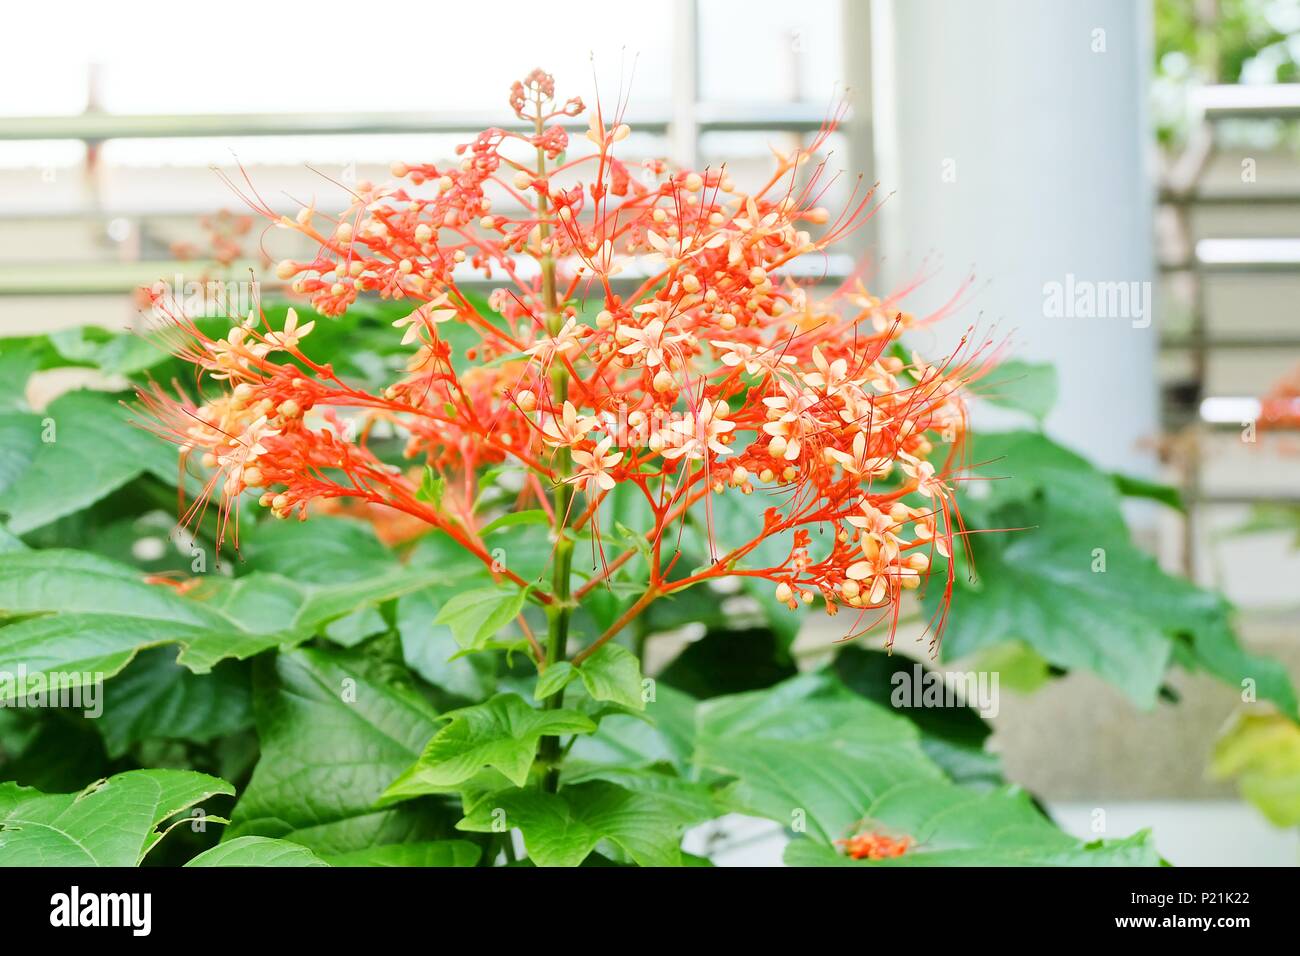 Beautiful Flower, Bunch of Red Clerodendrum Paniculatum Flowers or Pagoda Flowers with Green Leaves. Stock Photo